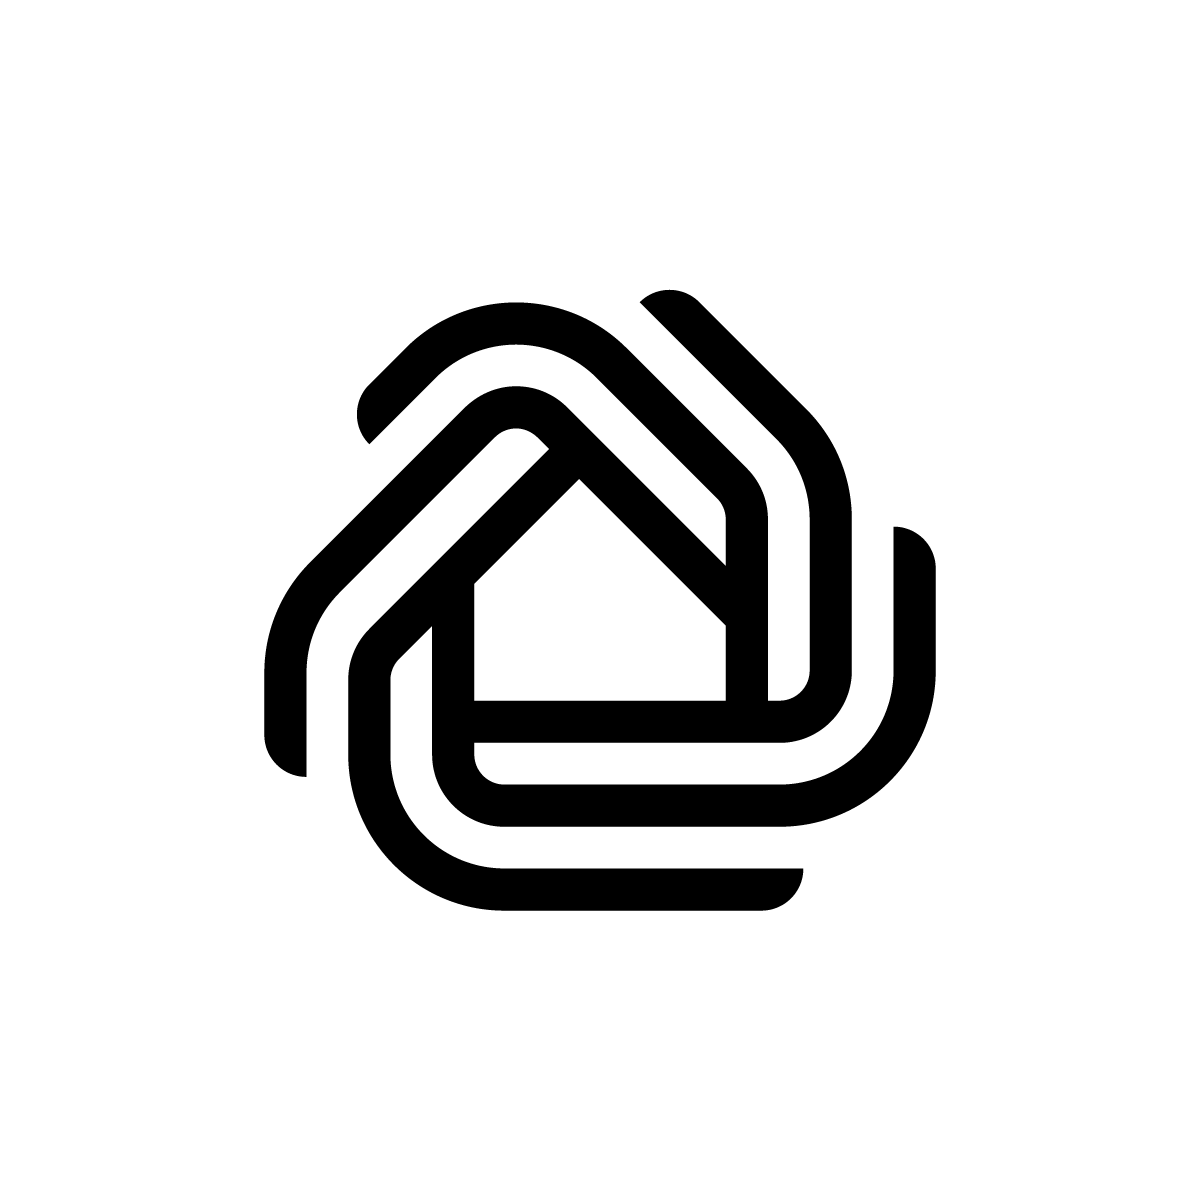 House Nest Logo creatively merges lines to craft a harmonious blend of house and nest, symbolizing home, security, unity, and community for real estate, property development, and hospitality ventures.